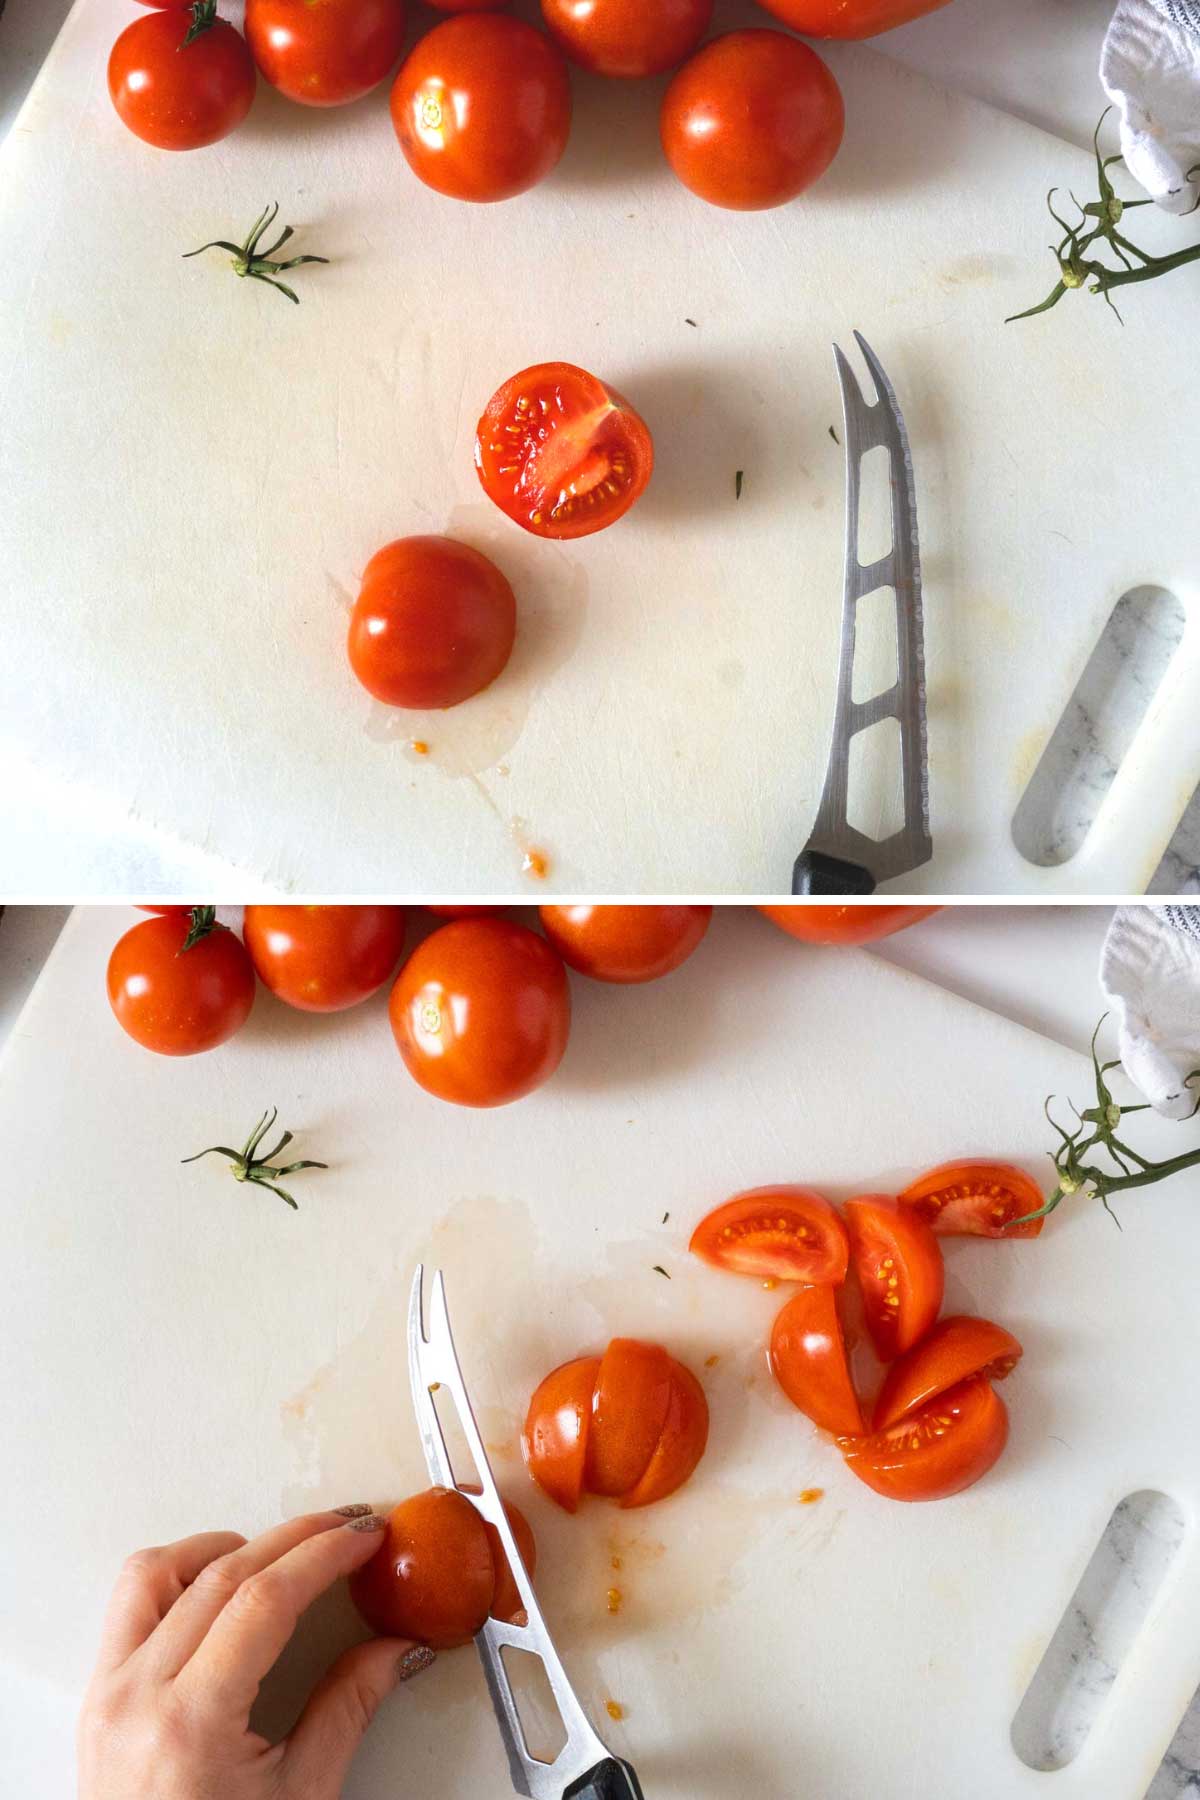 Cutting tomatoes into wedges.